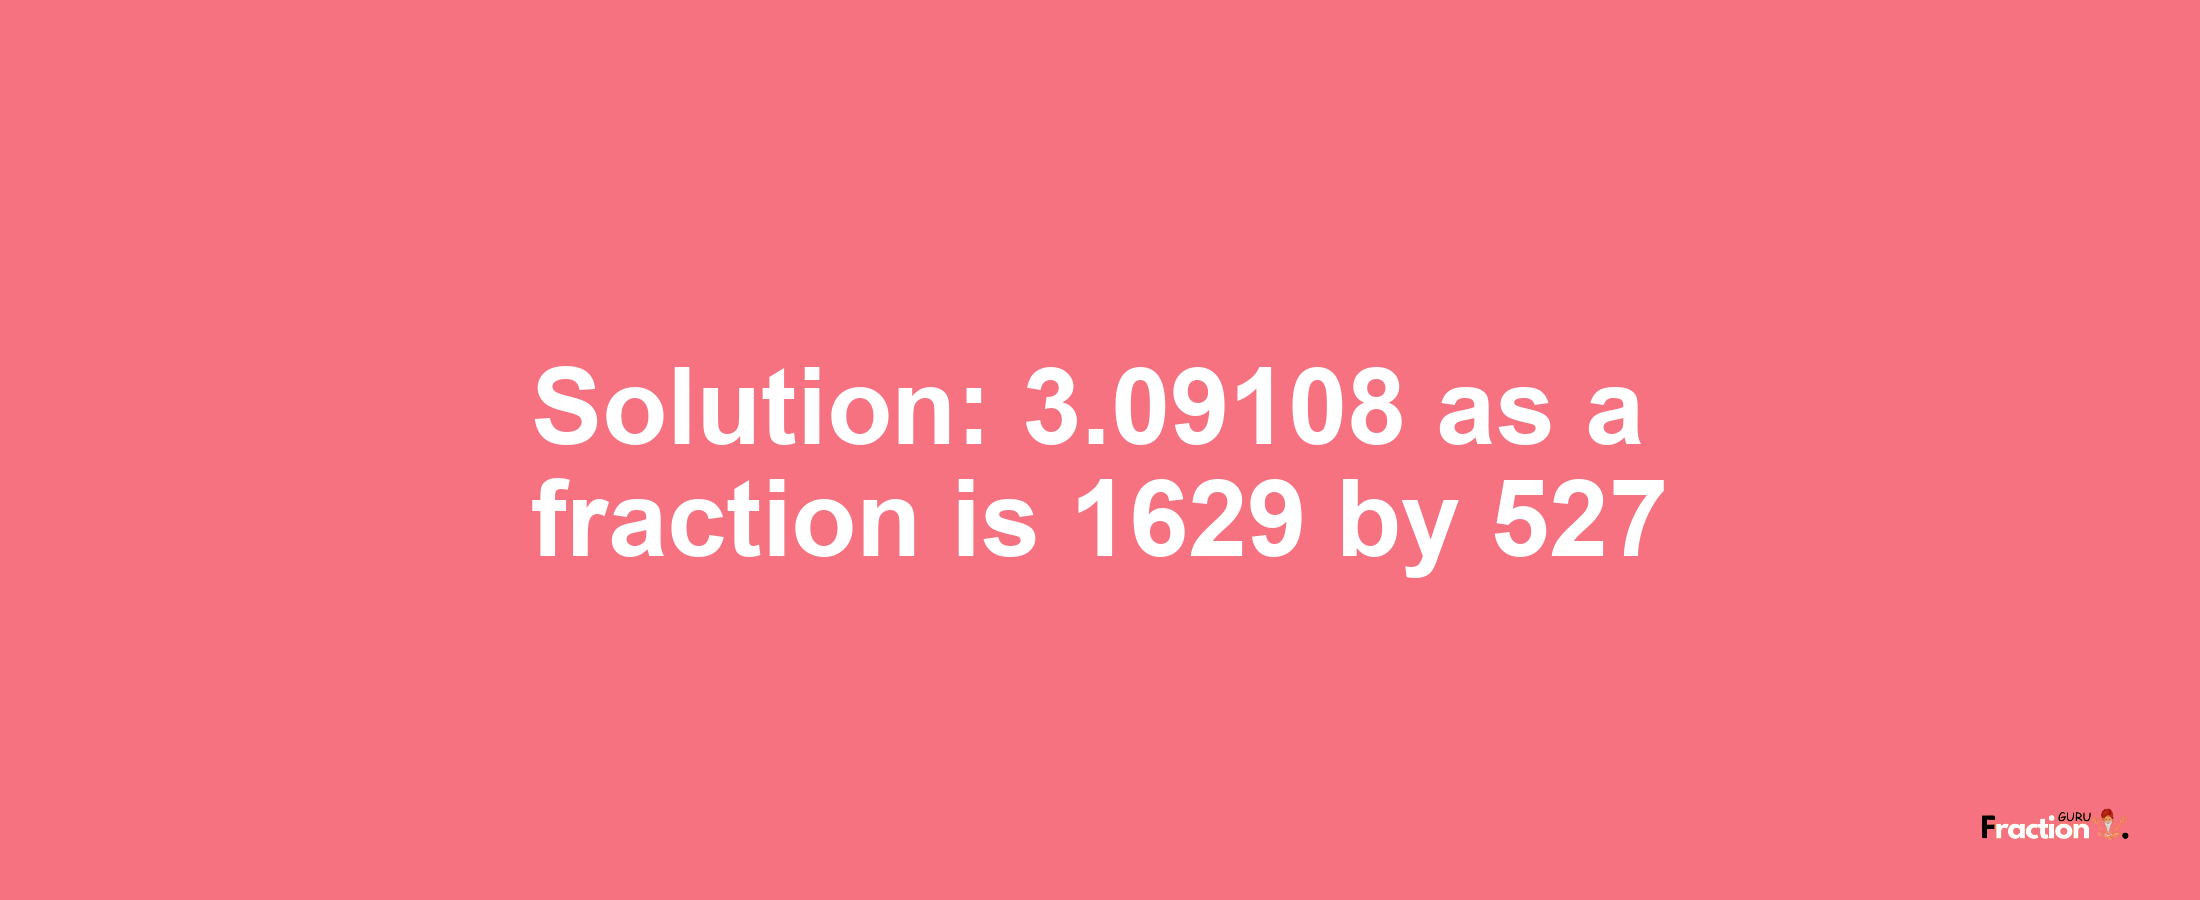 Solution:3.09108 as a fraction is 1629/527